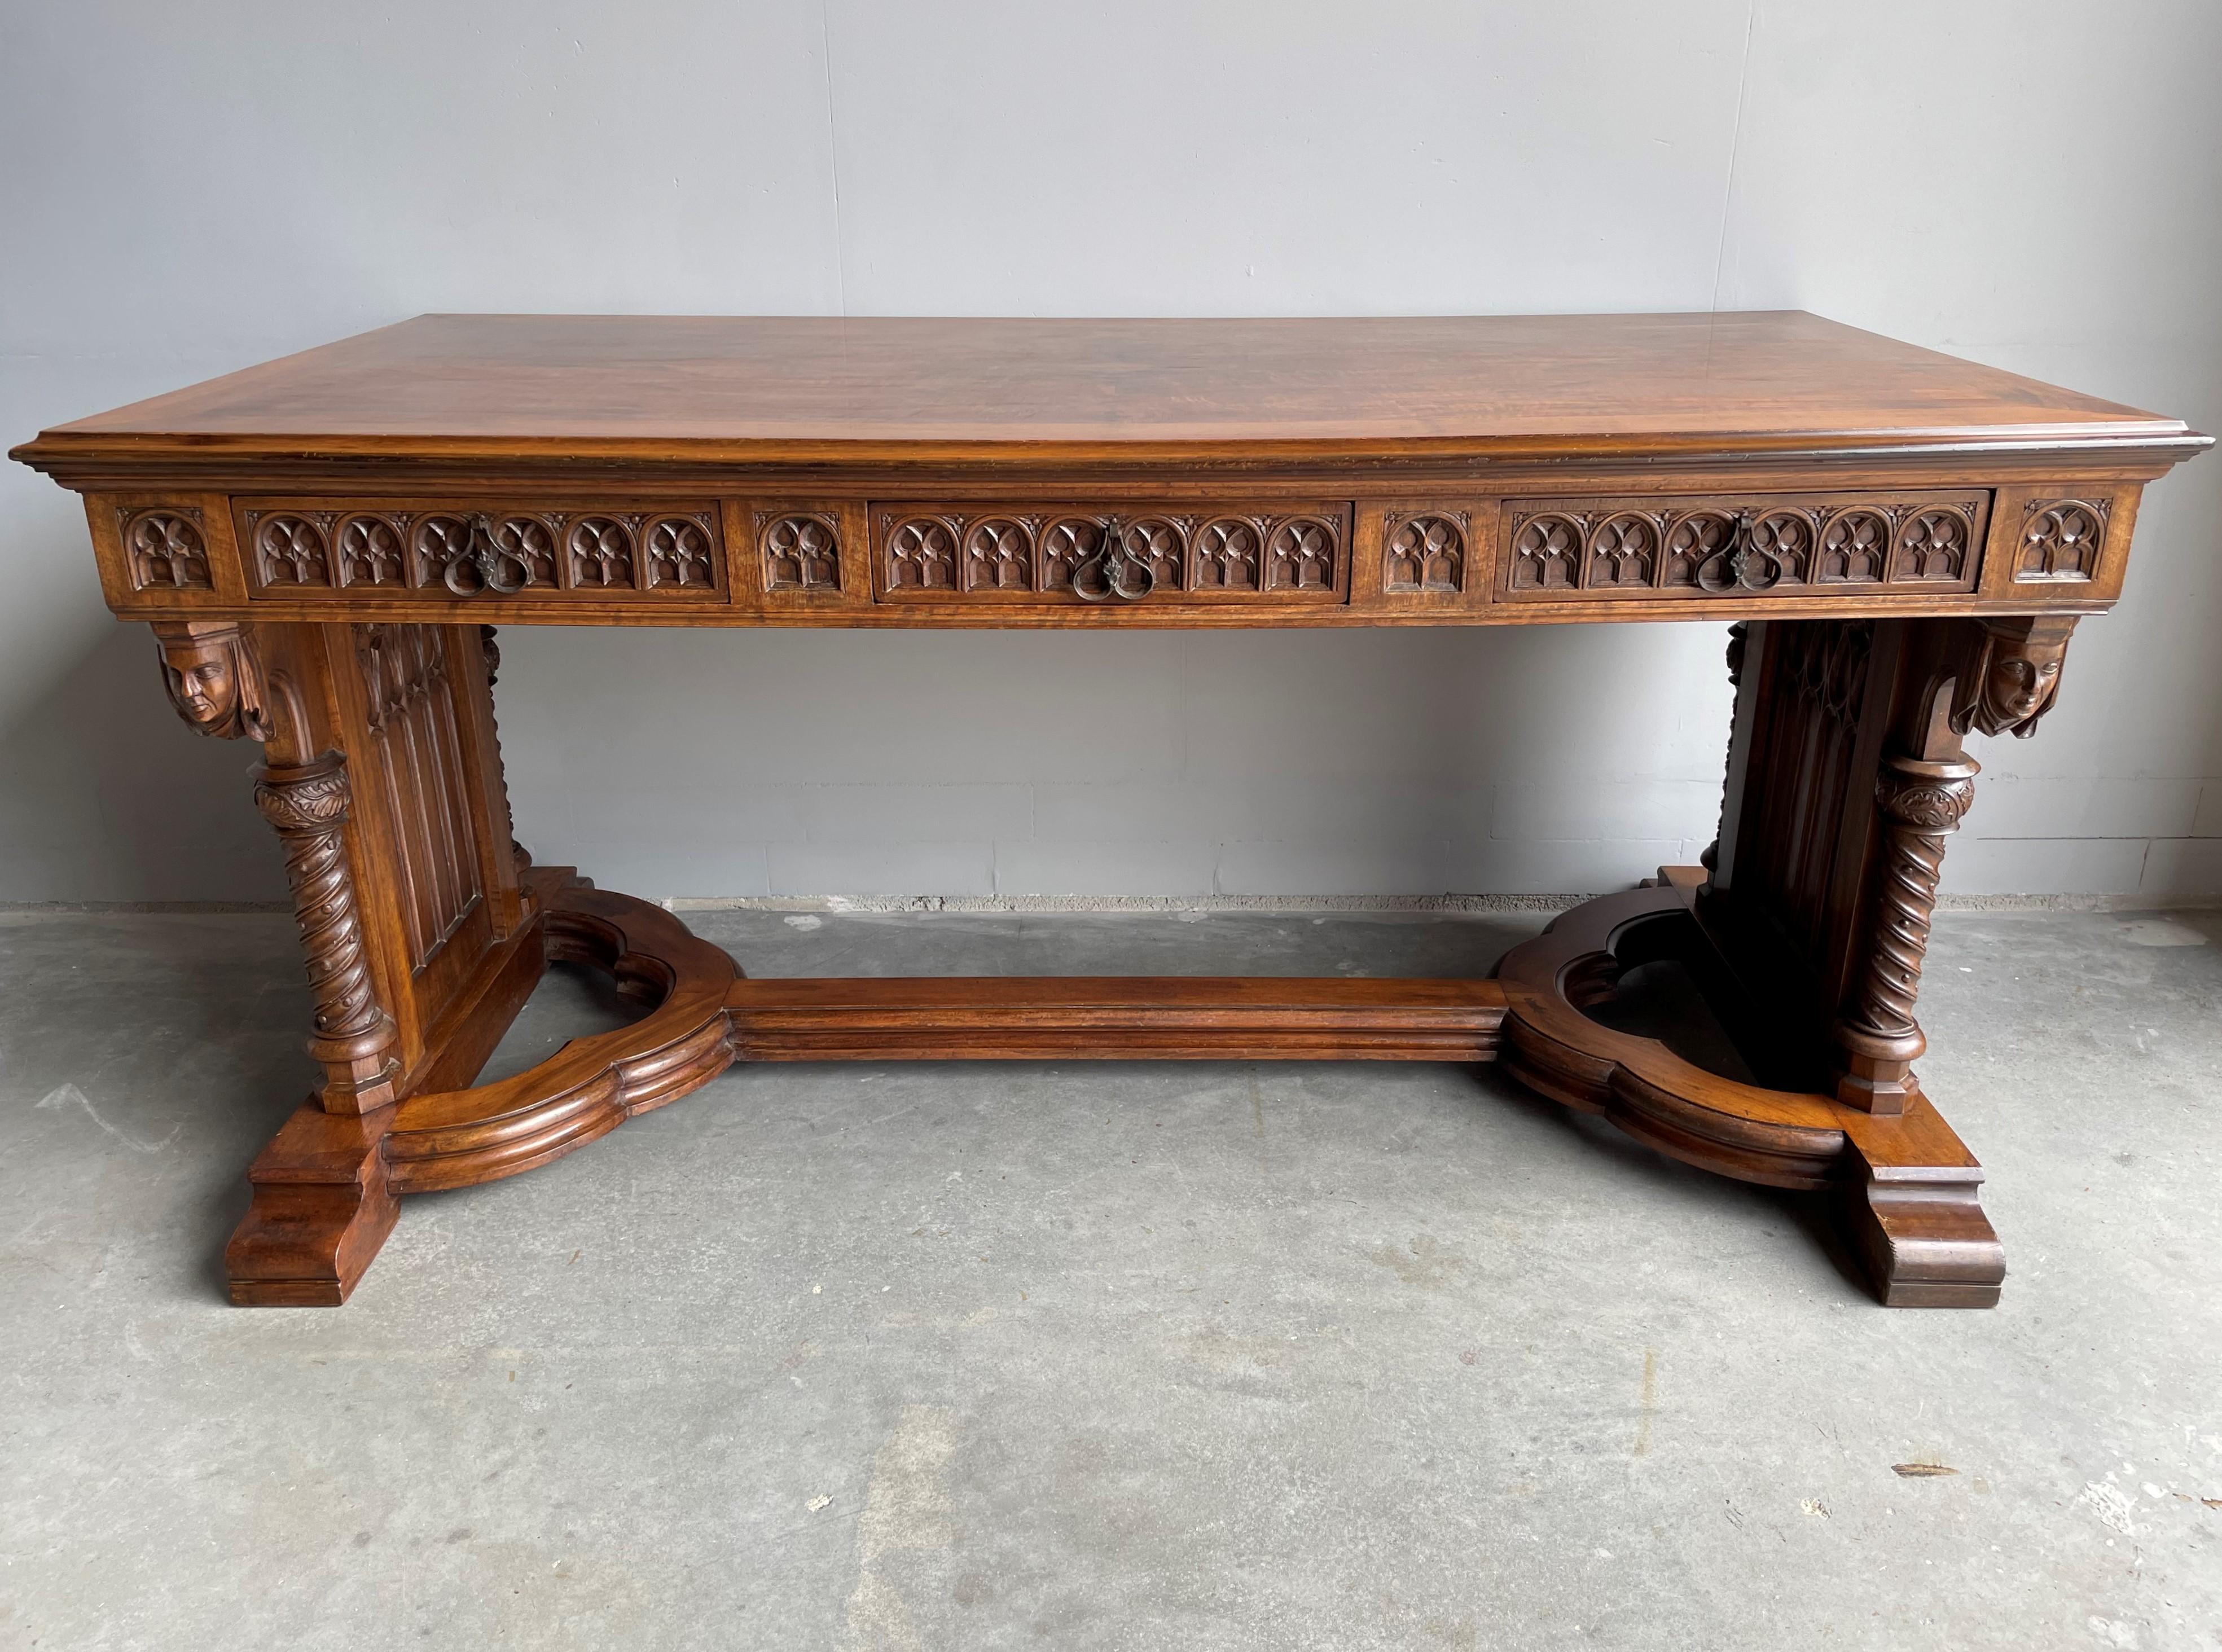 Gothic Revival Antique Gothic Desk w. Hand Carved Church Windows, Holy Men, Chimeras & Drawers For Sale